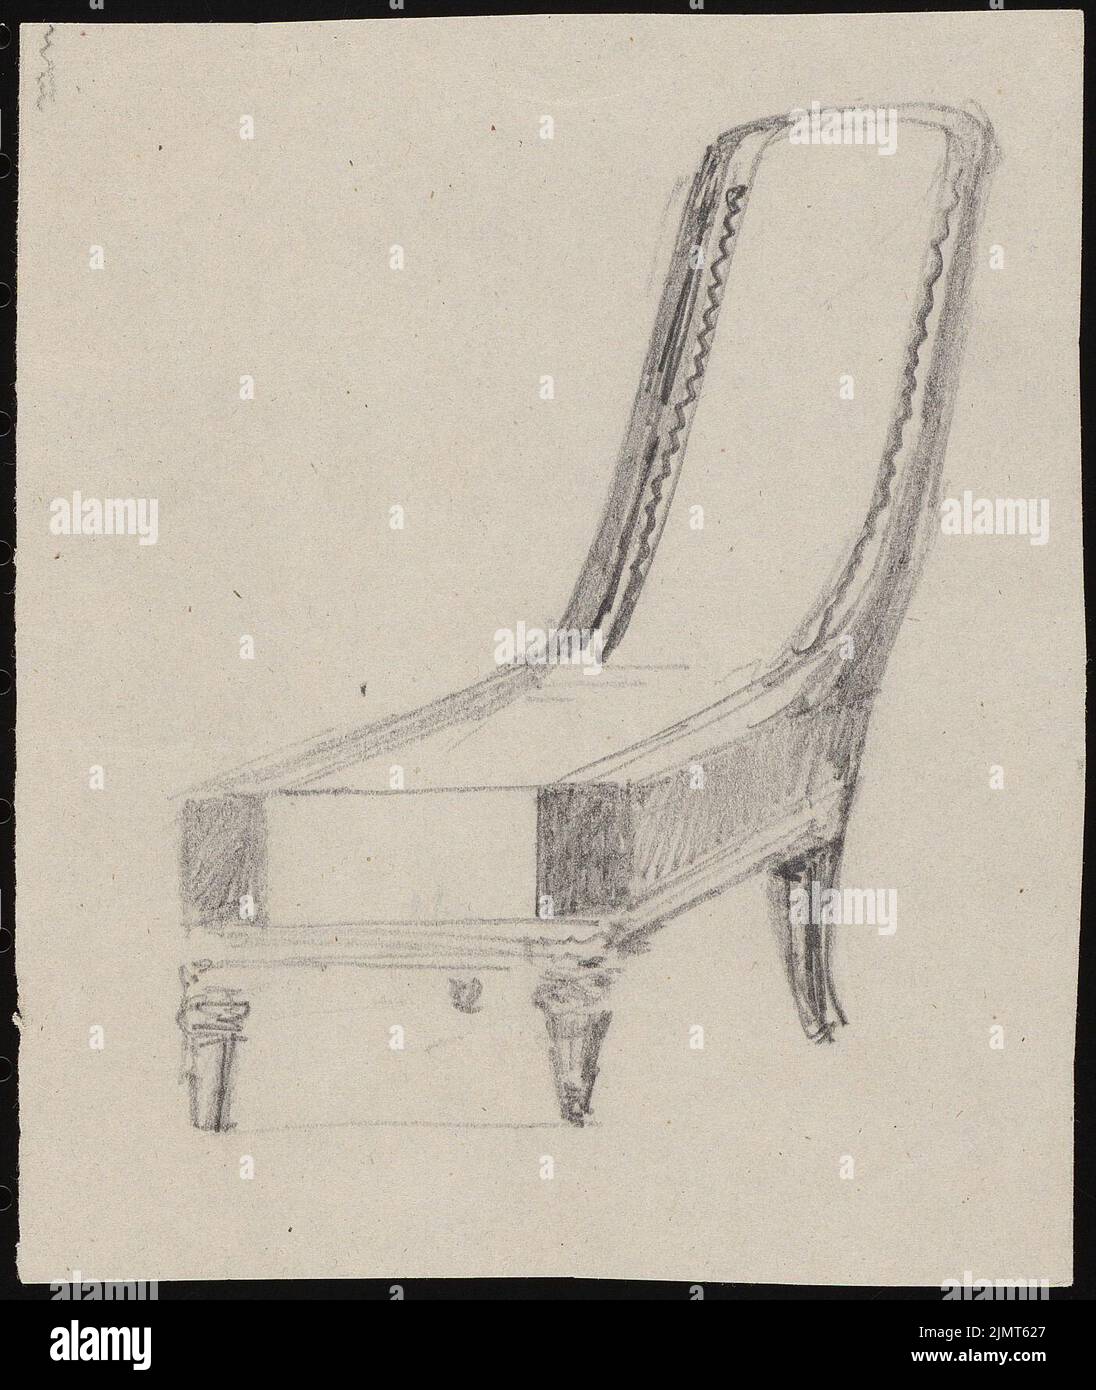 Diebitsch Carl von (1819-1869), armchair, Cairo. (?) (Without Dat.): View of a armchair with a high backrest without armrests. Pencil on cardboard, 14.1 x 11.9 cm (including scan edges) Diebitsch Carl von  (1819-1869): Sessel Stock Photo